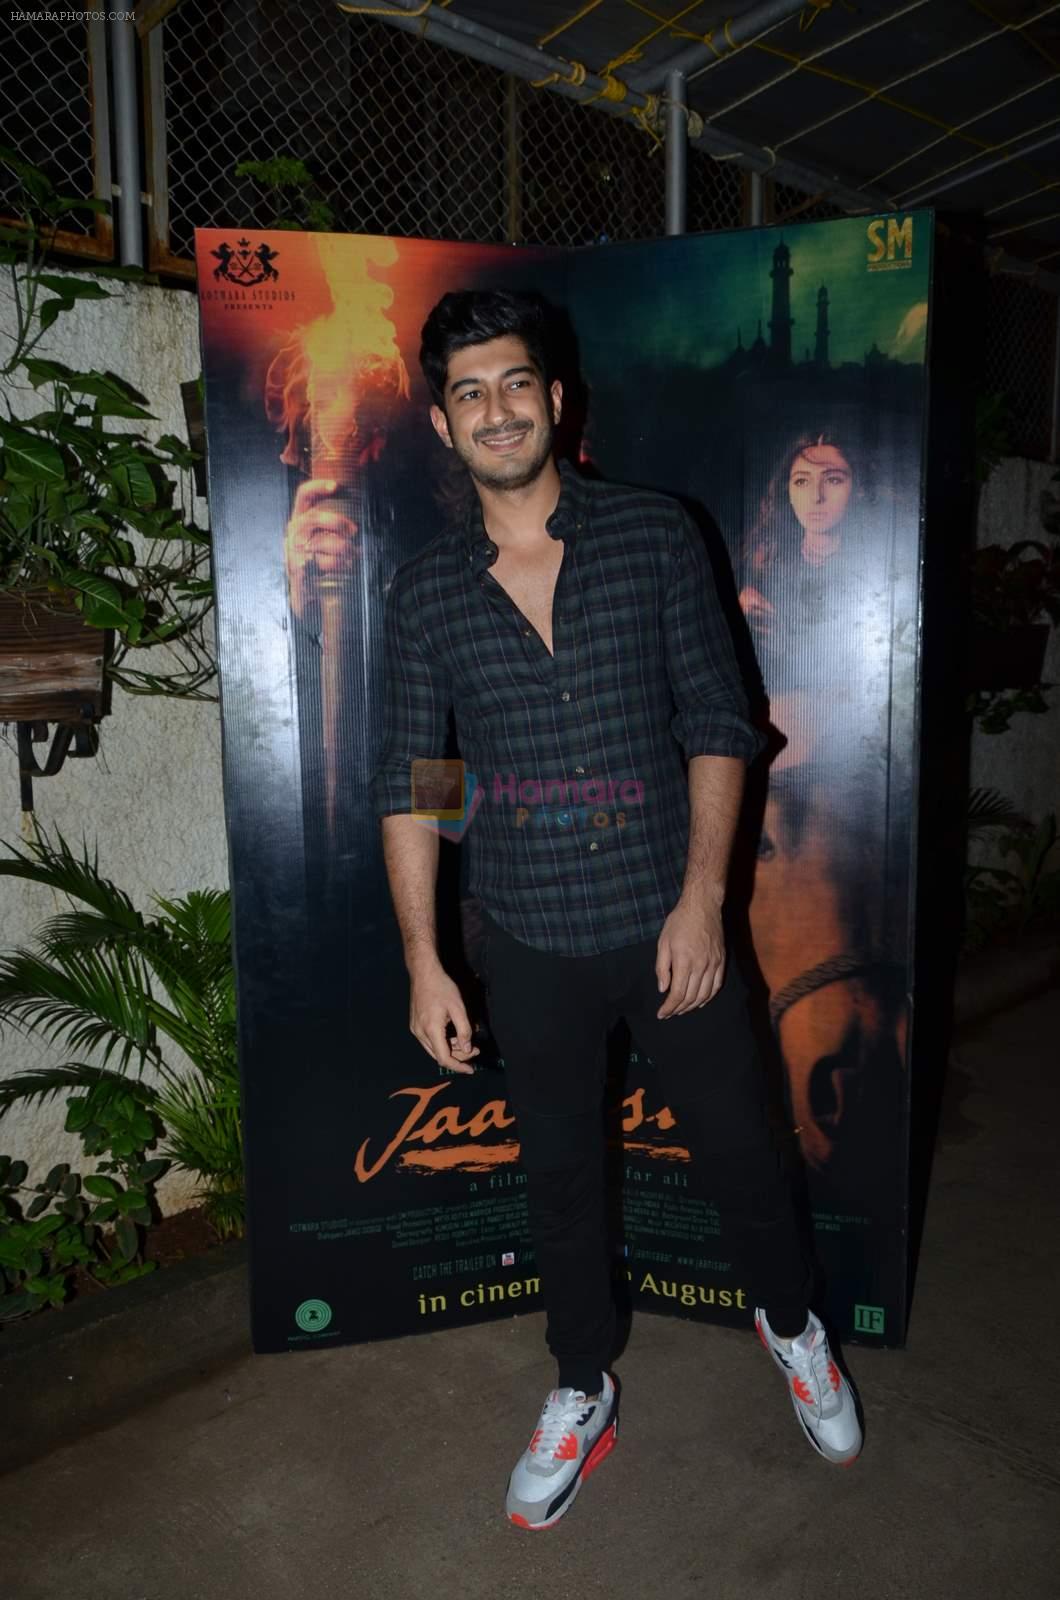 Mohit Marwah at Jaanisaar Screening in Sunny Super Sound on 6th Aug 2015